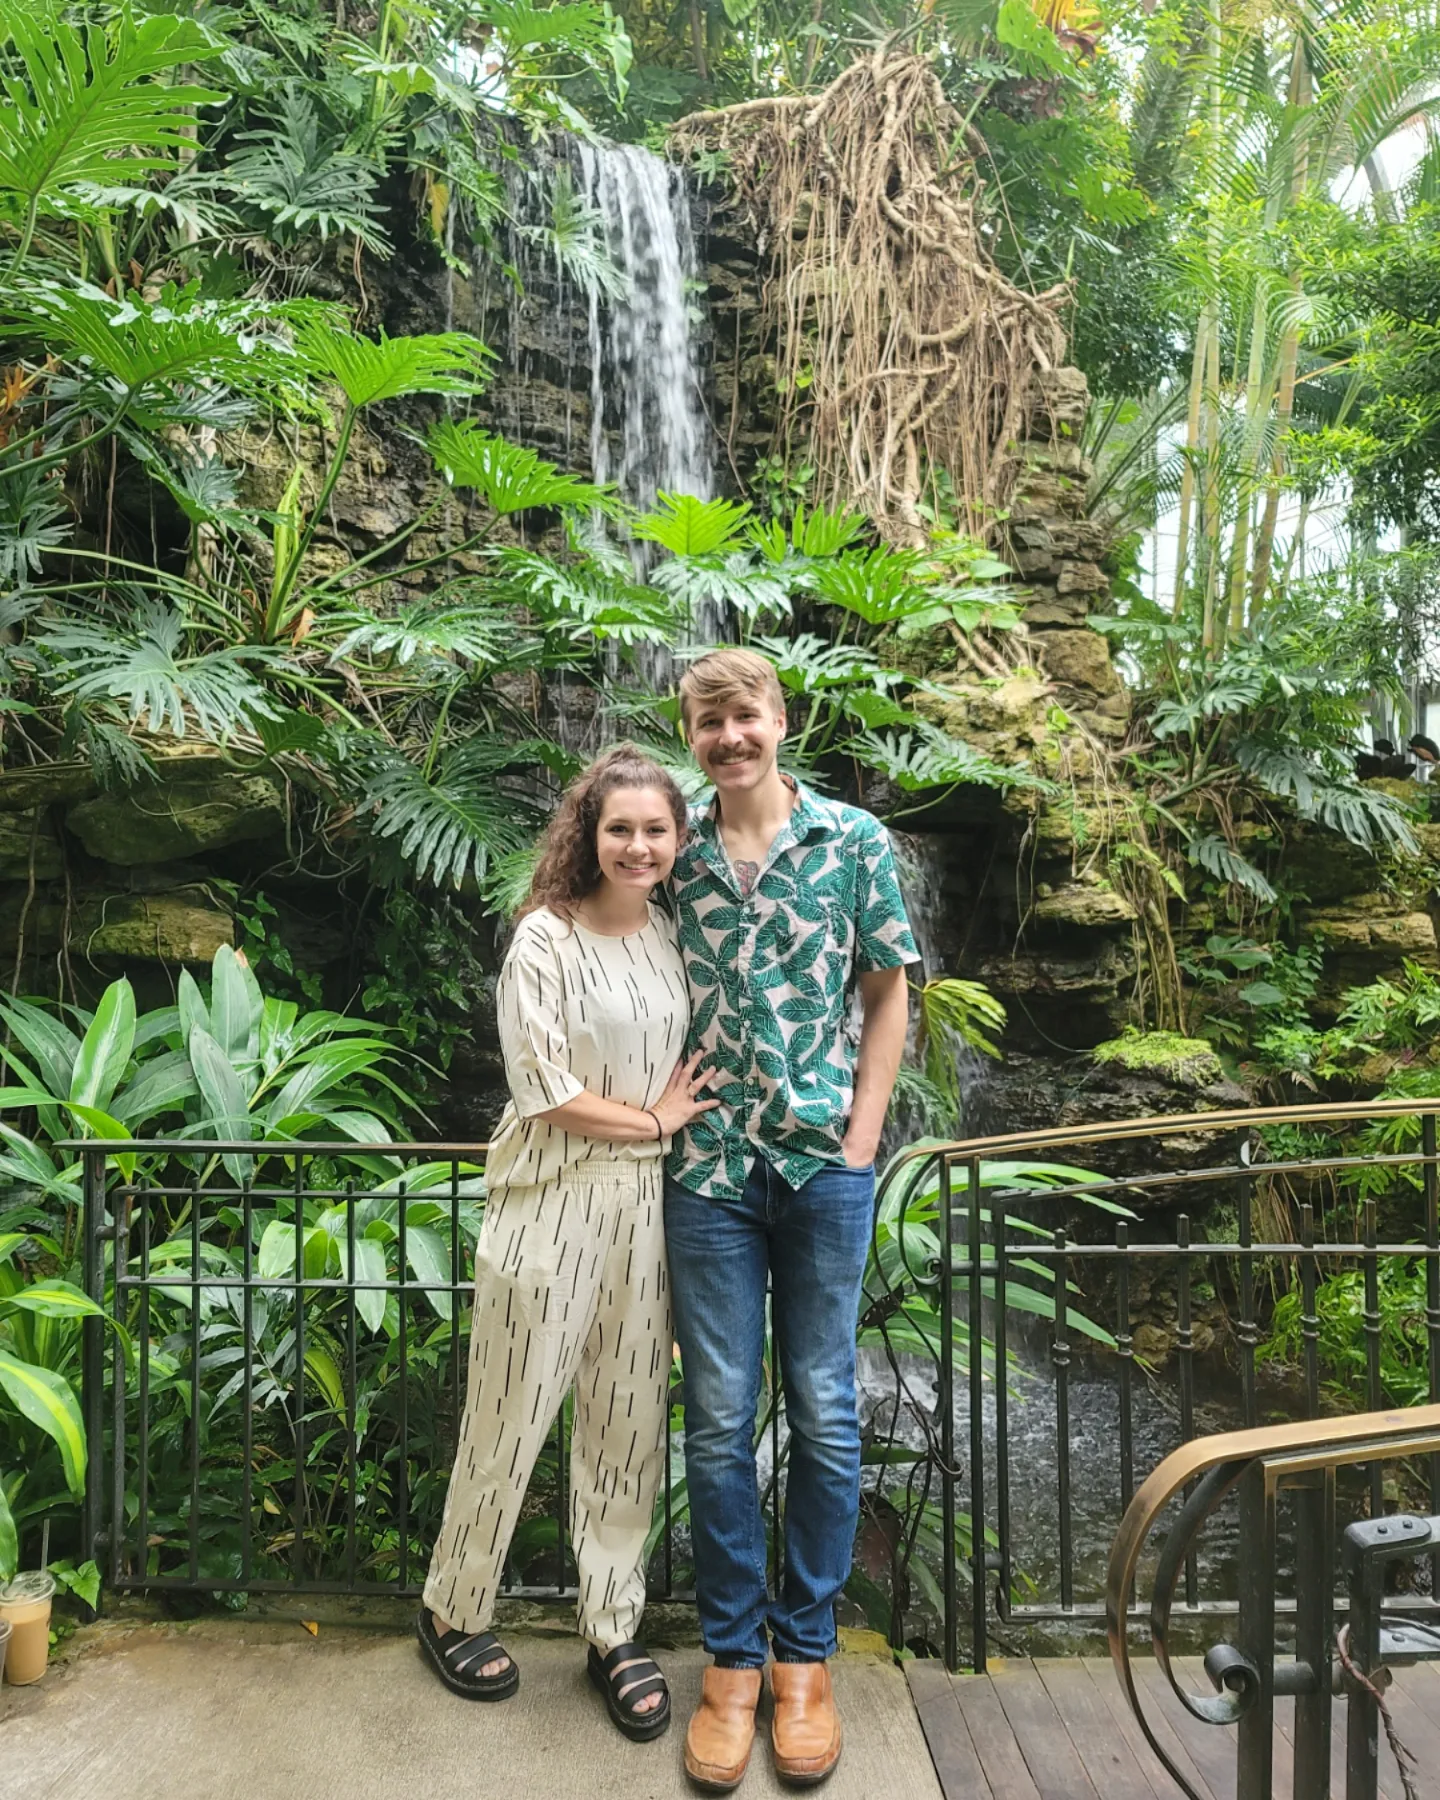 Clay Huffman and His wife posing in greenery